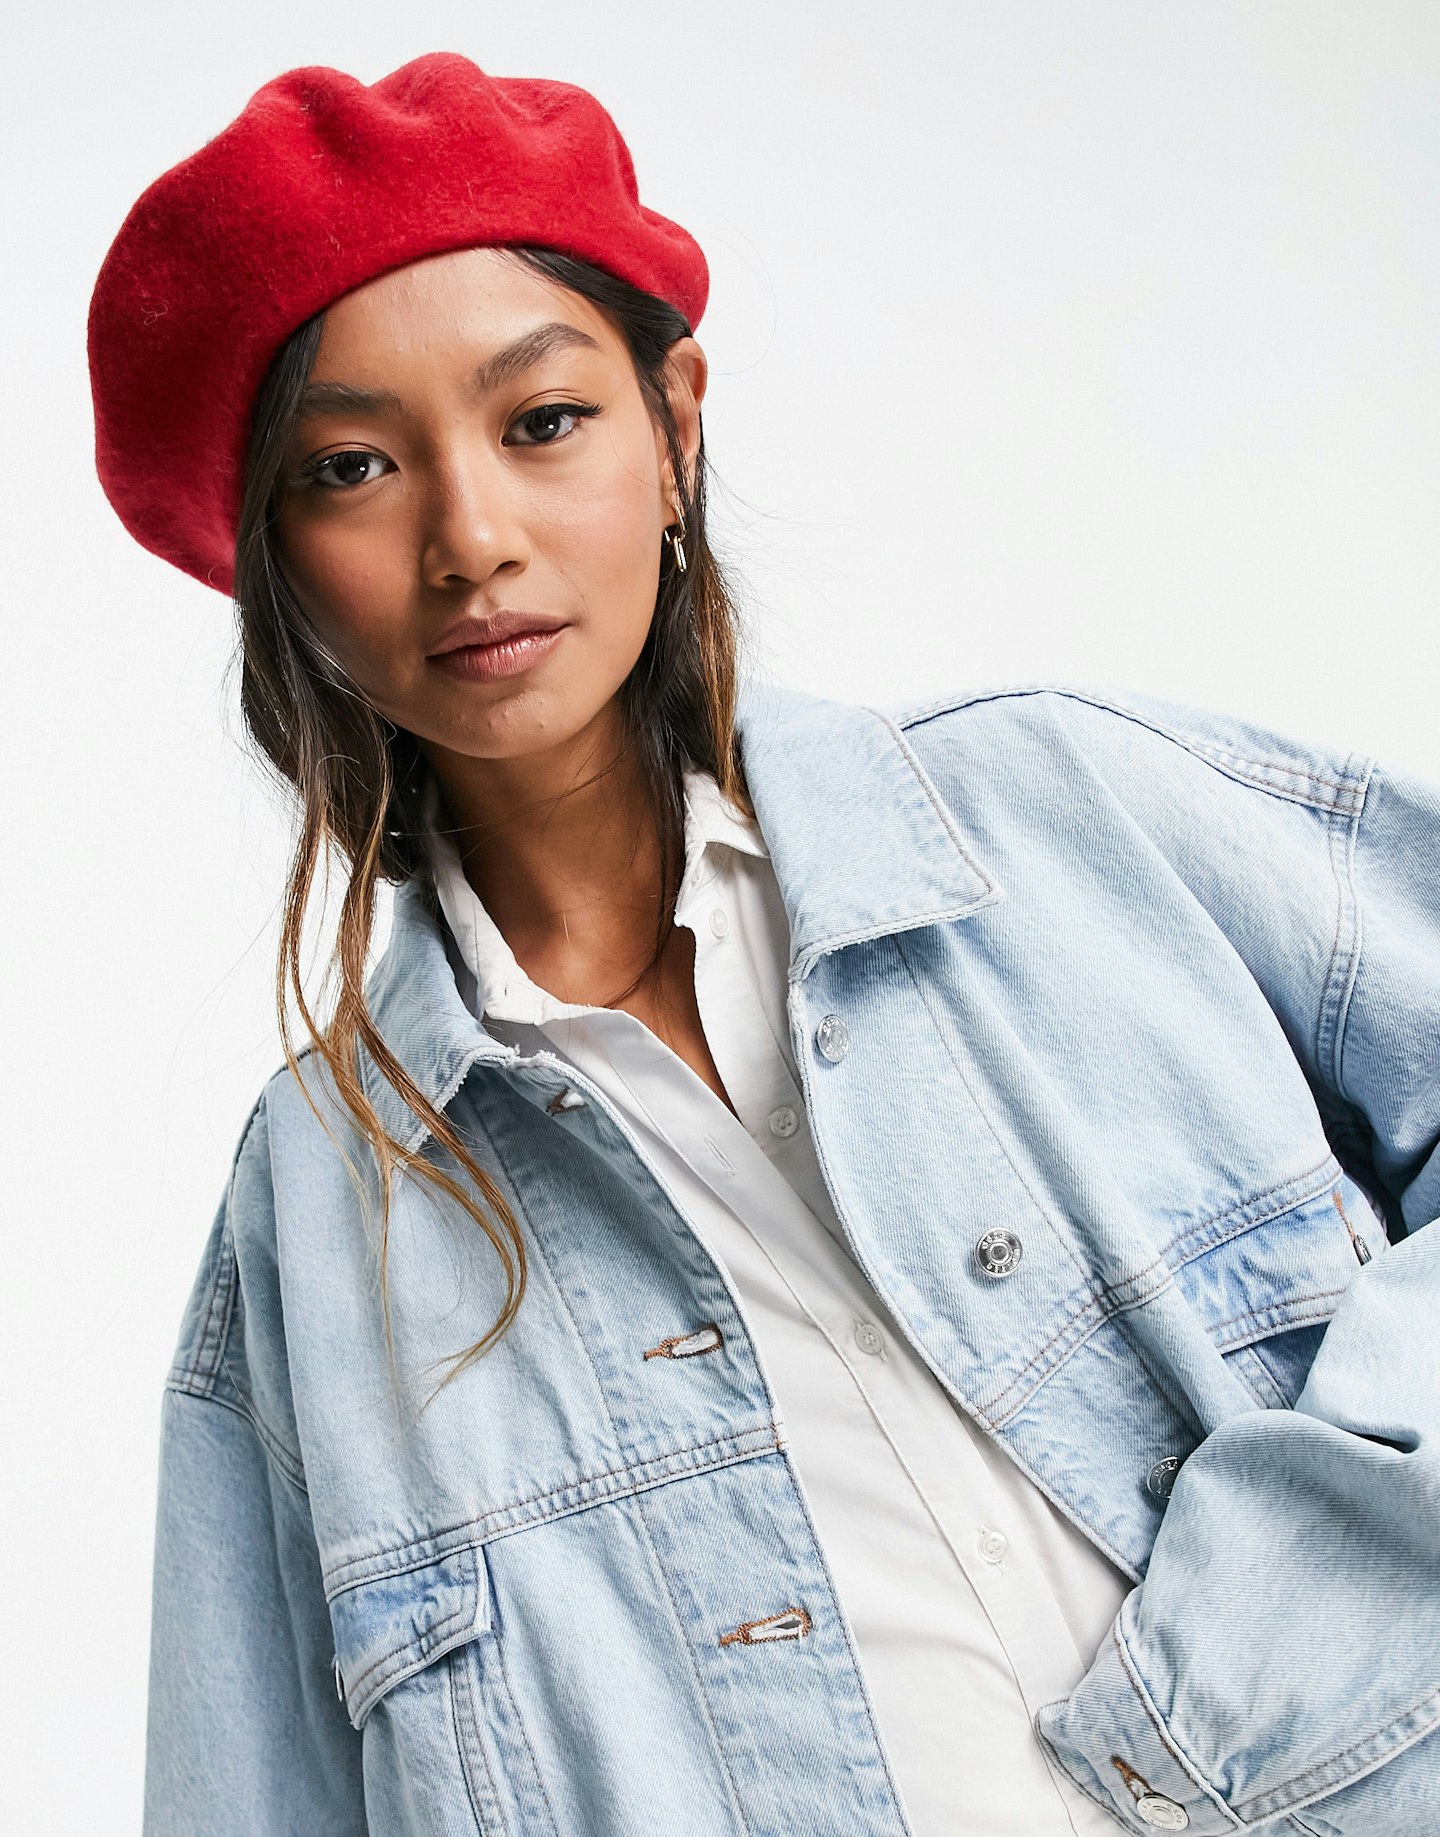 ASOS DESIGN wool beret with improved fit in red